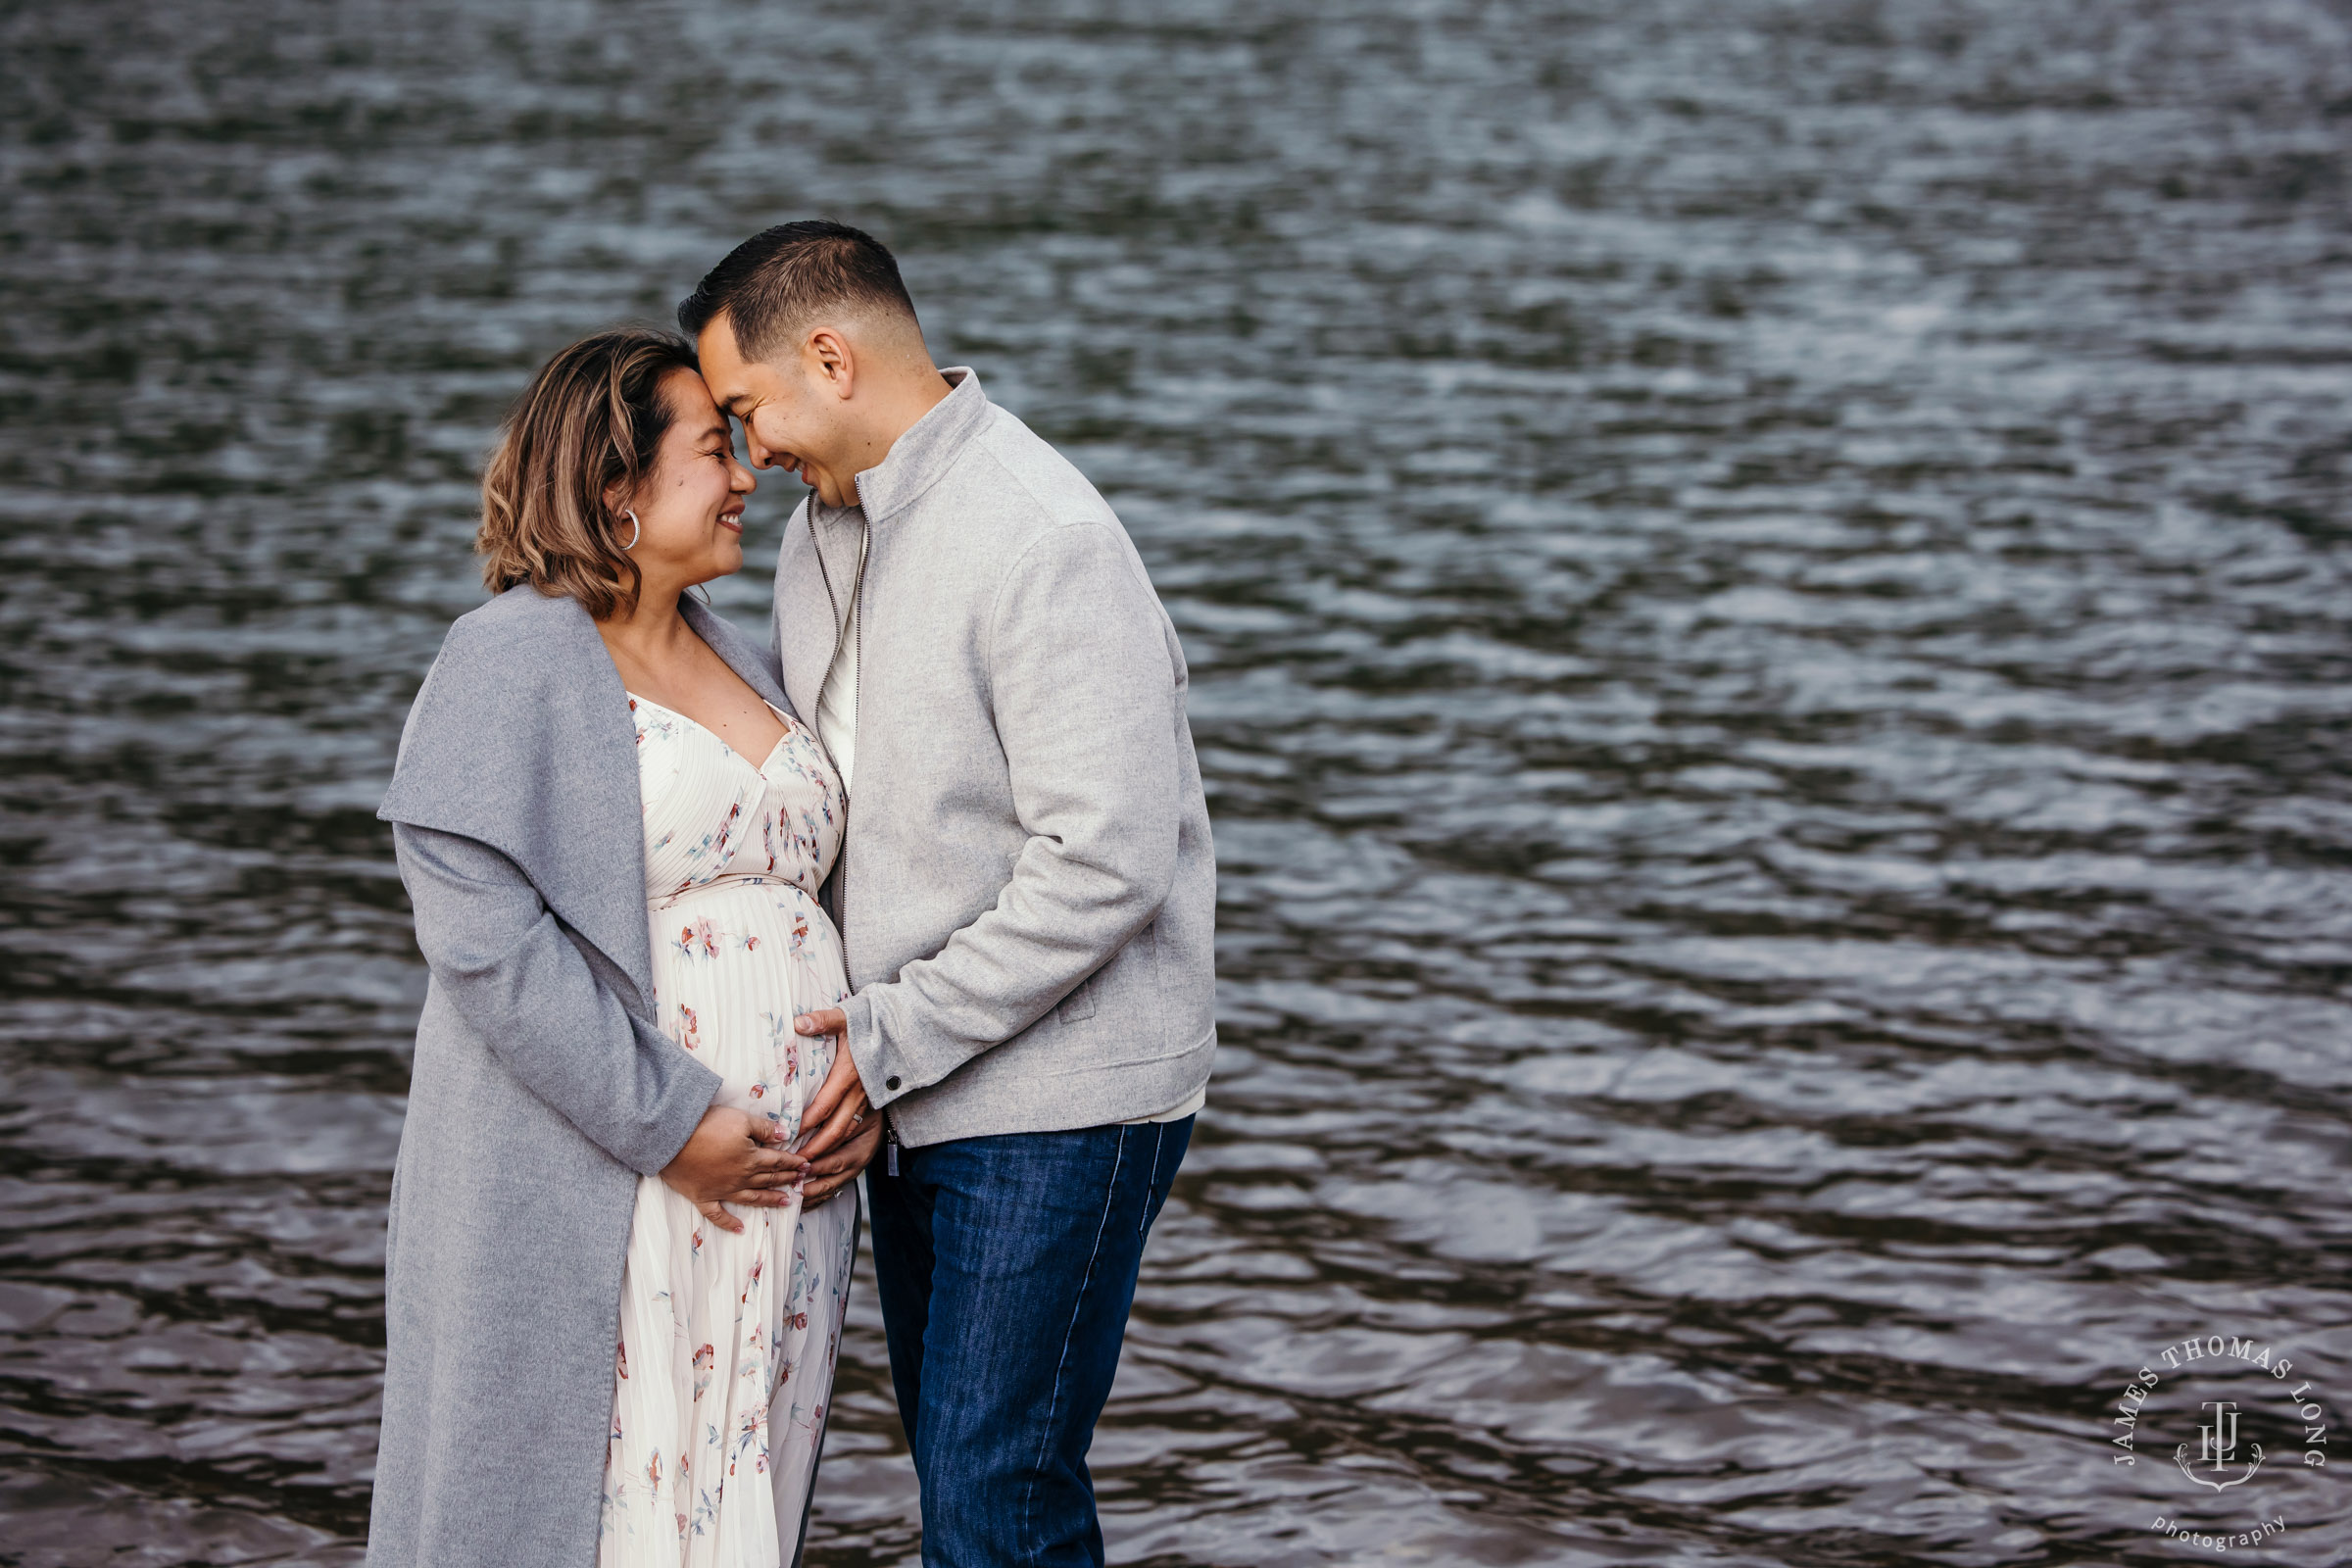 North Bend maternity session by Snoqualmie valley family photographer James Thomas Long Photography